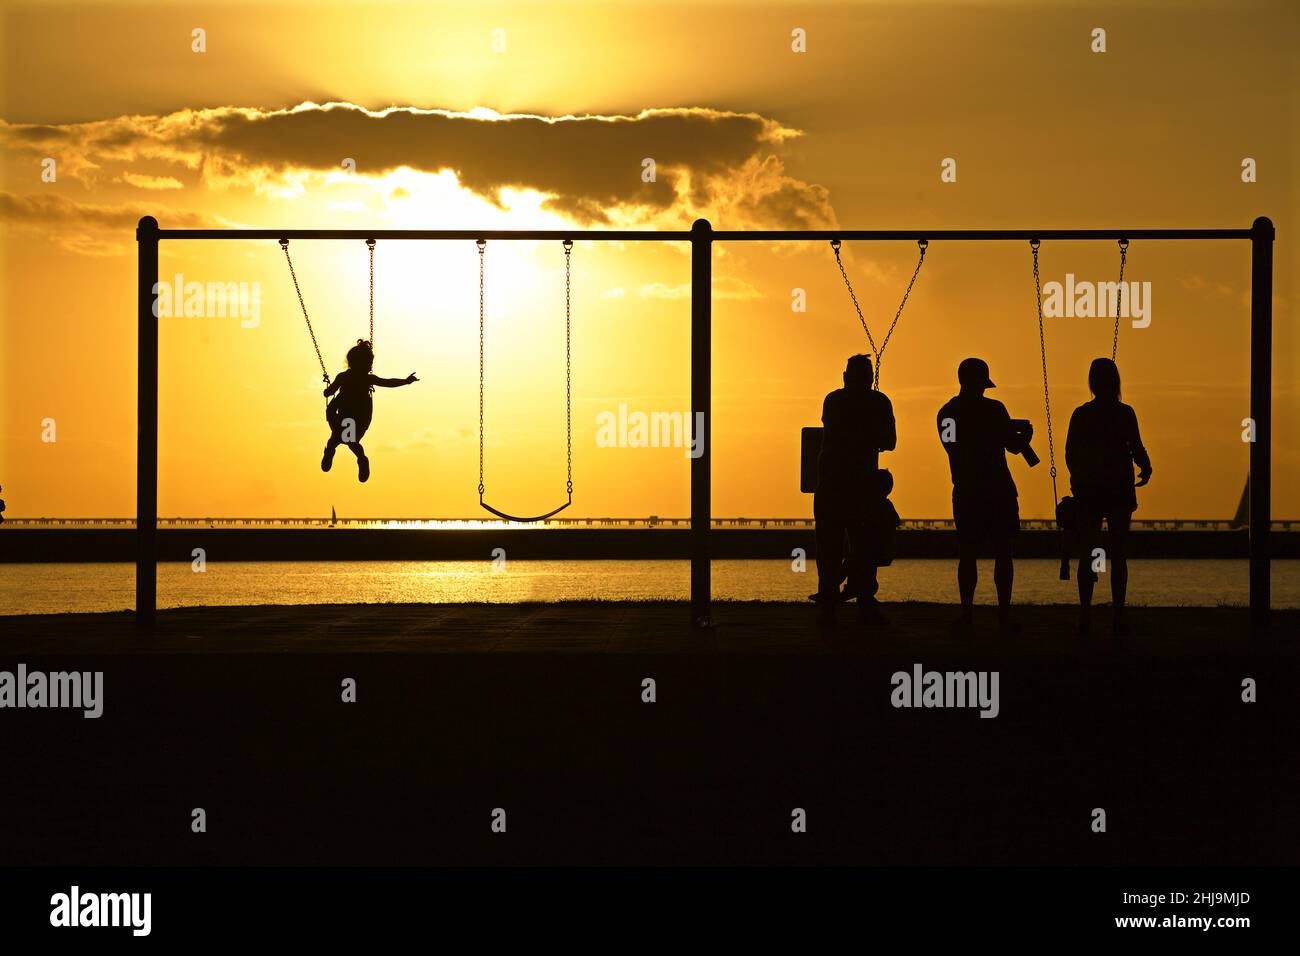 Parents and children in silhouette play on swings at sunset Stock Photo